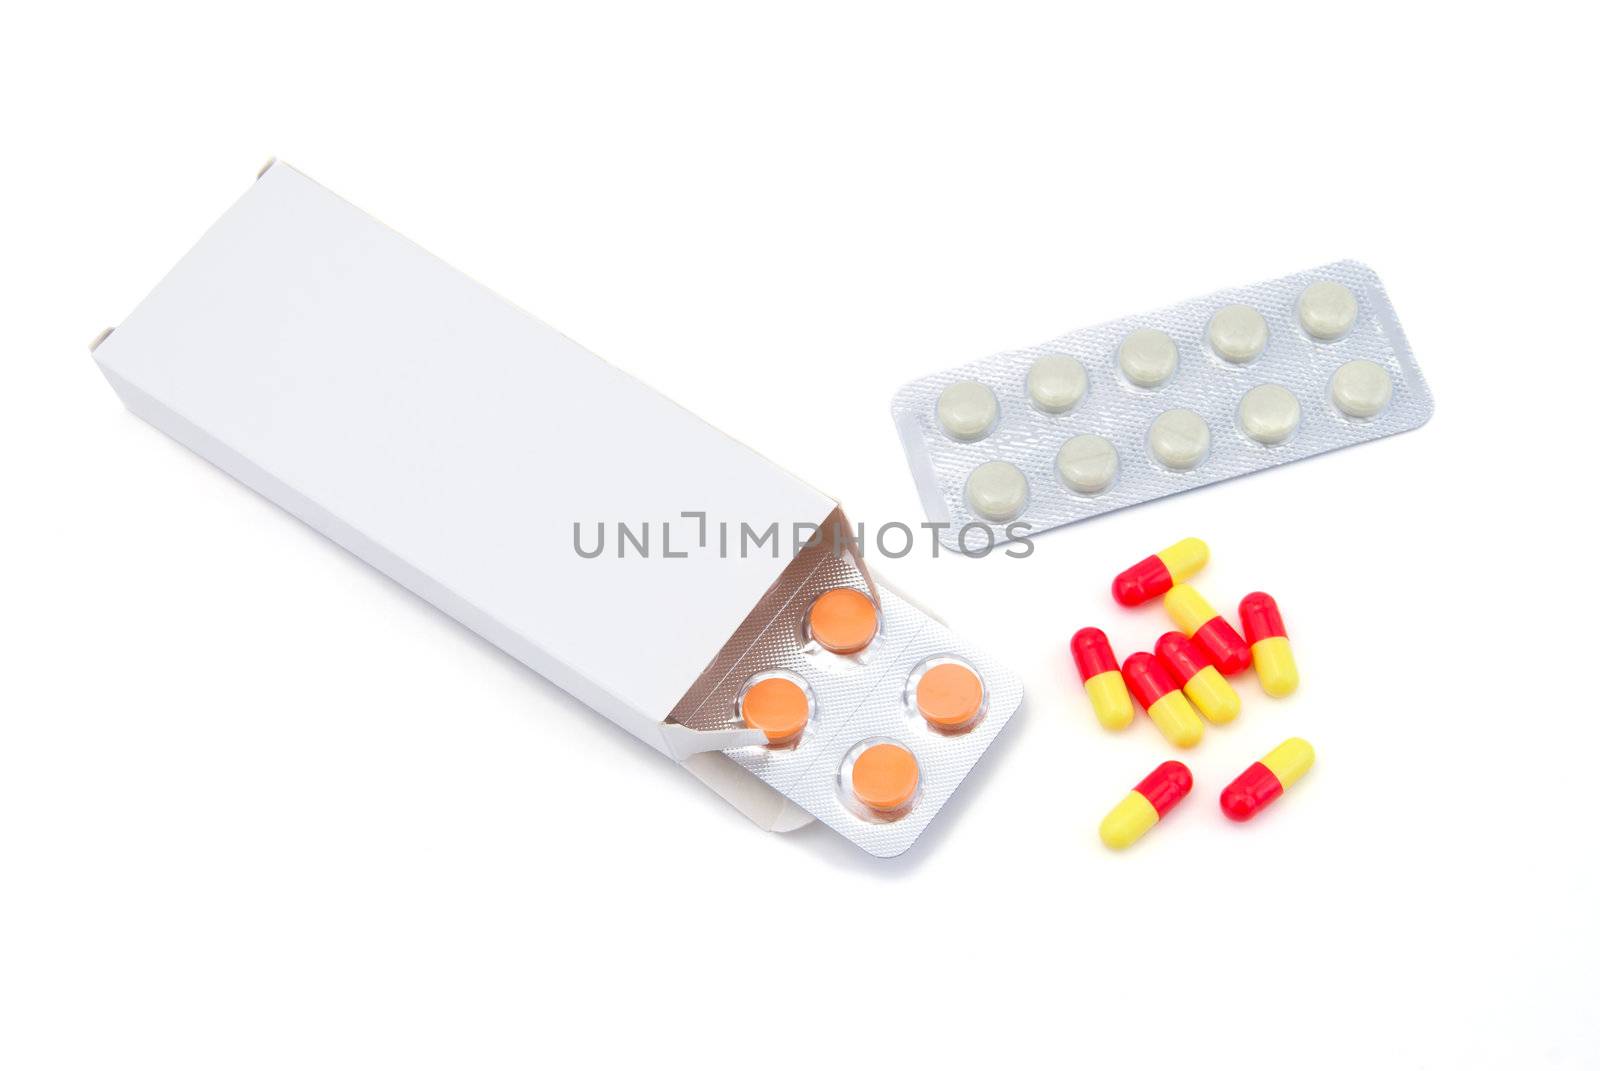 Packs of pills isolated on white background